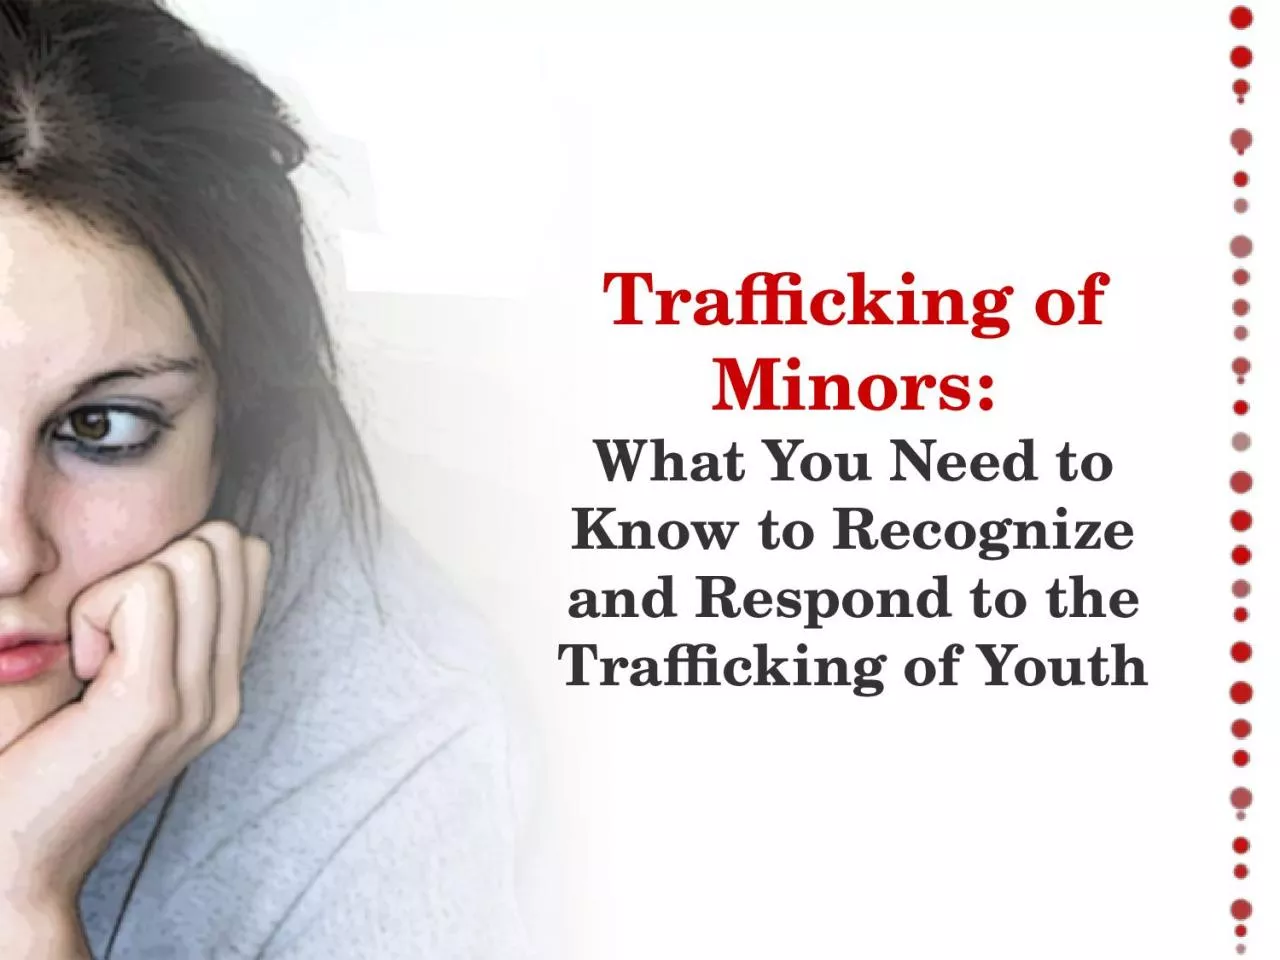 Trafficking of Minors: What You